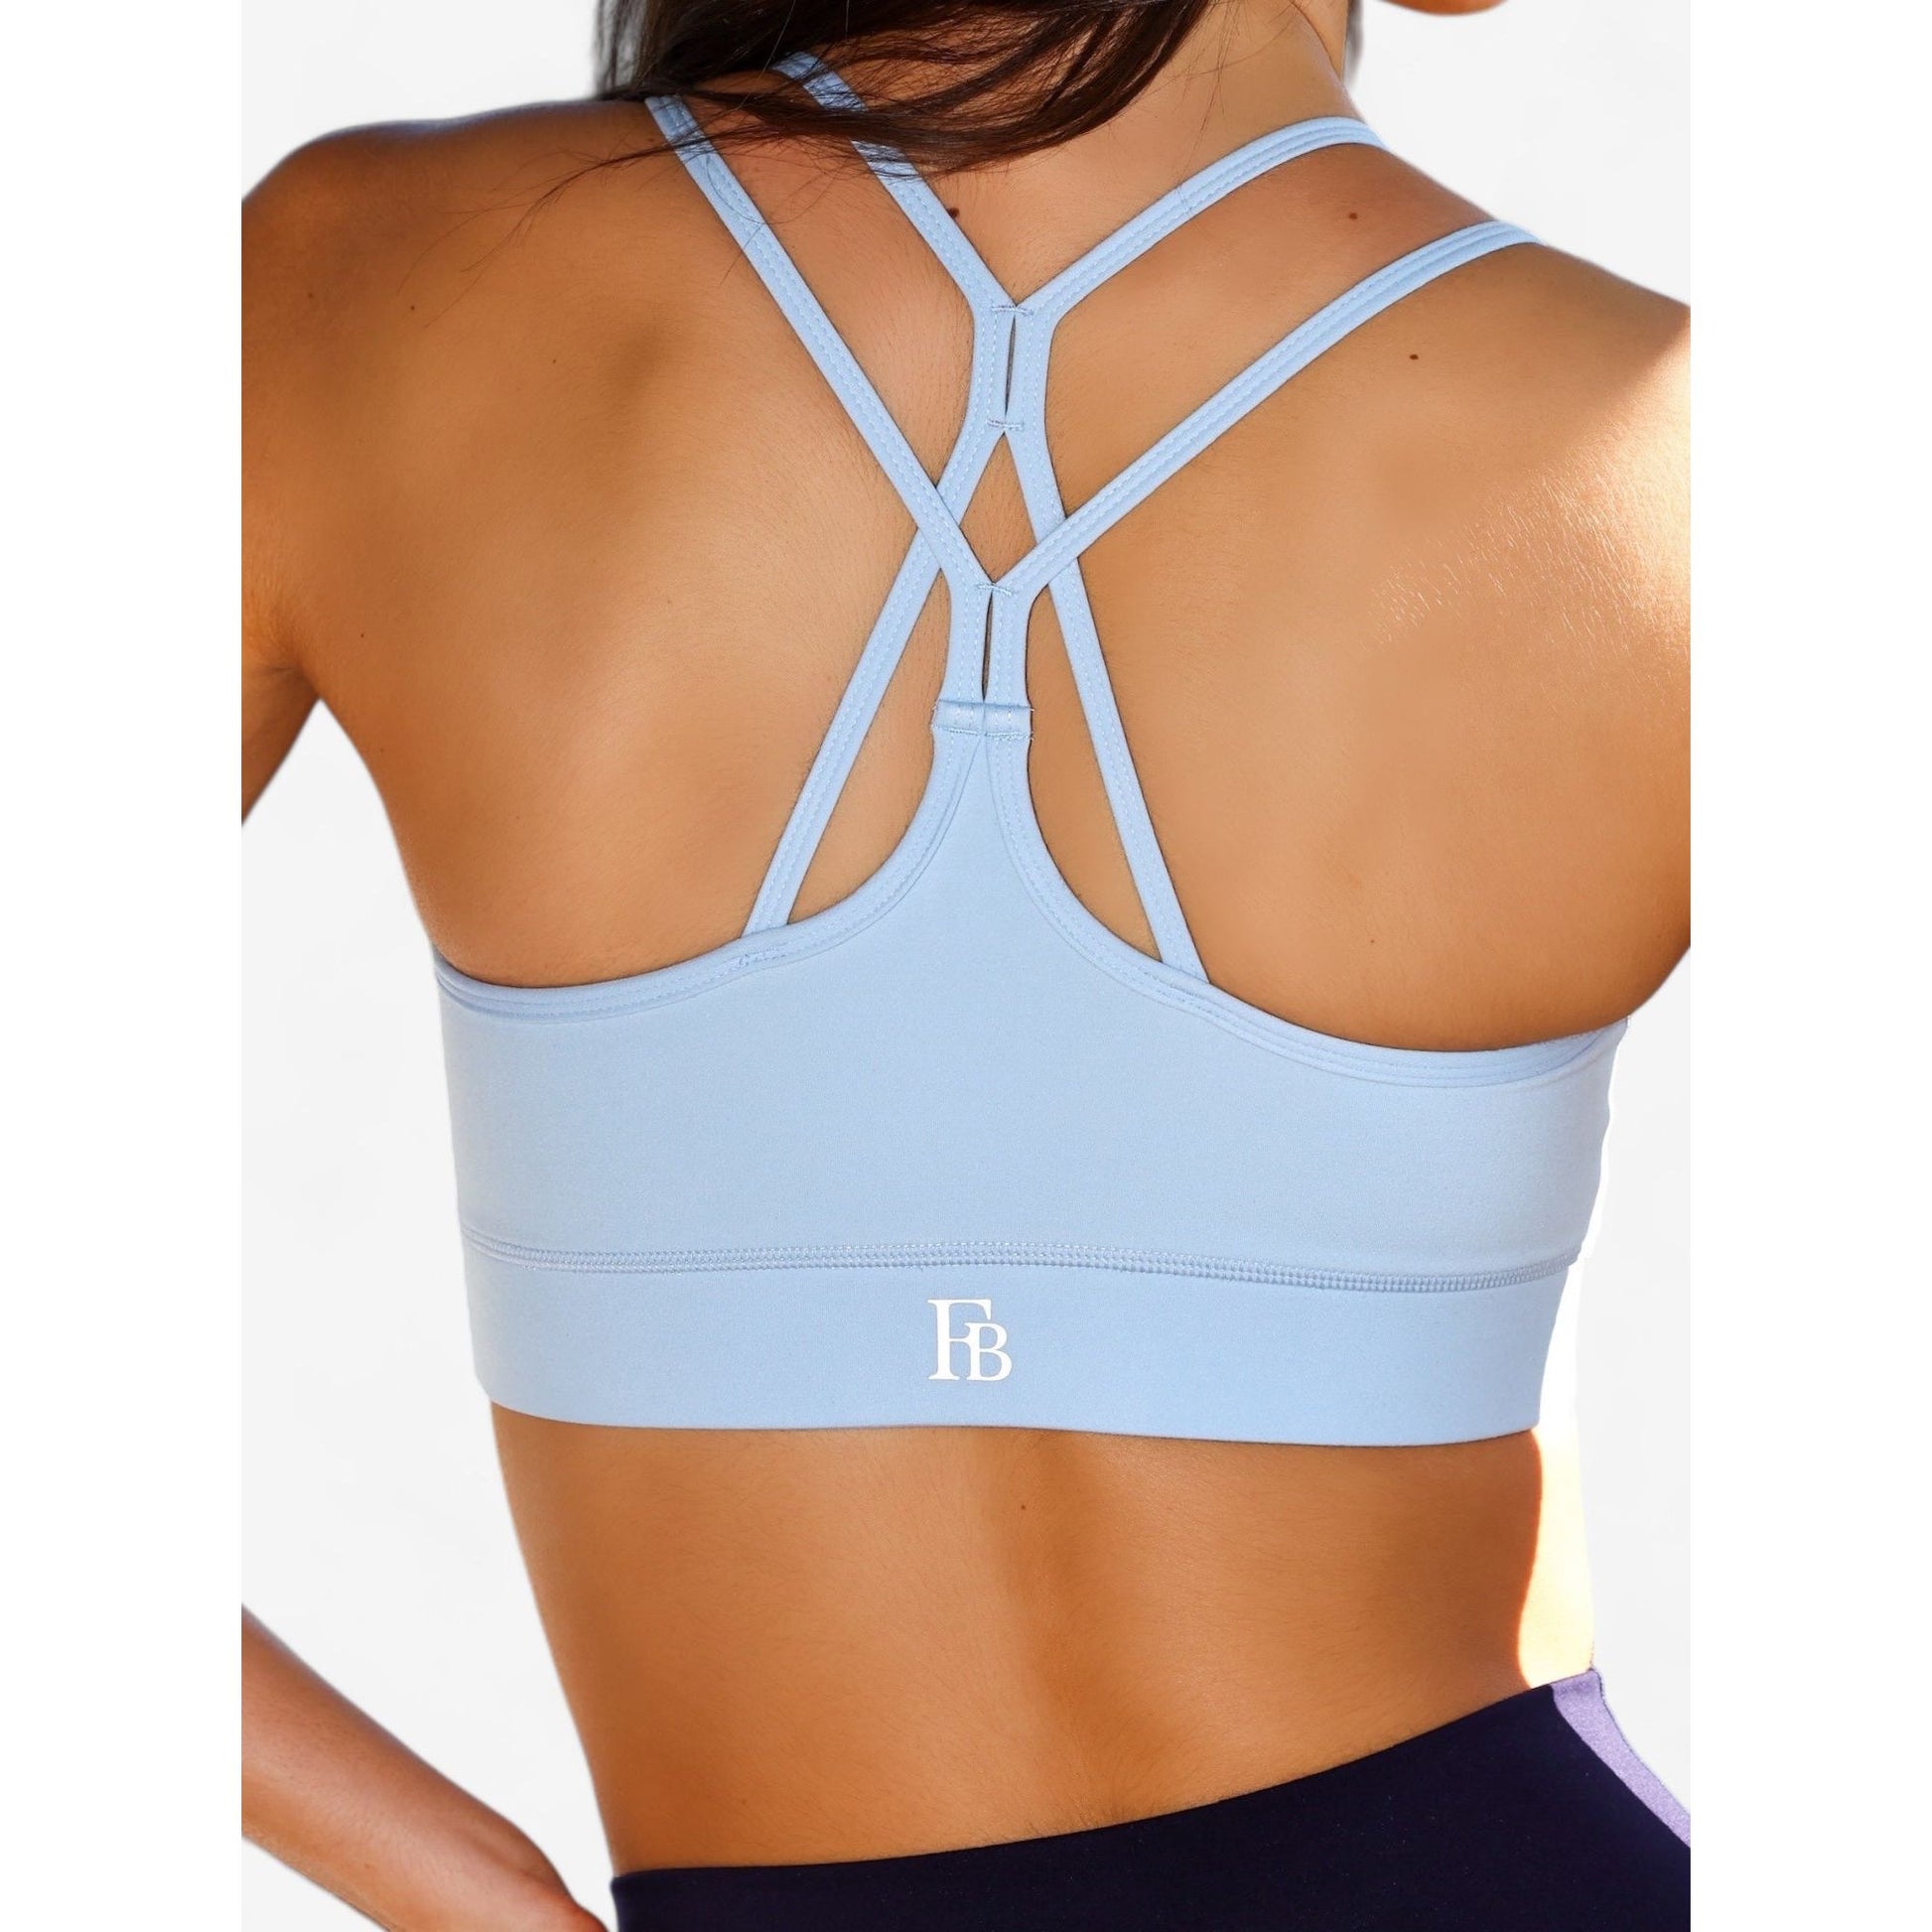 Double Trouble Strappy Sports Bra FitBrit